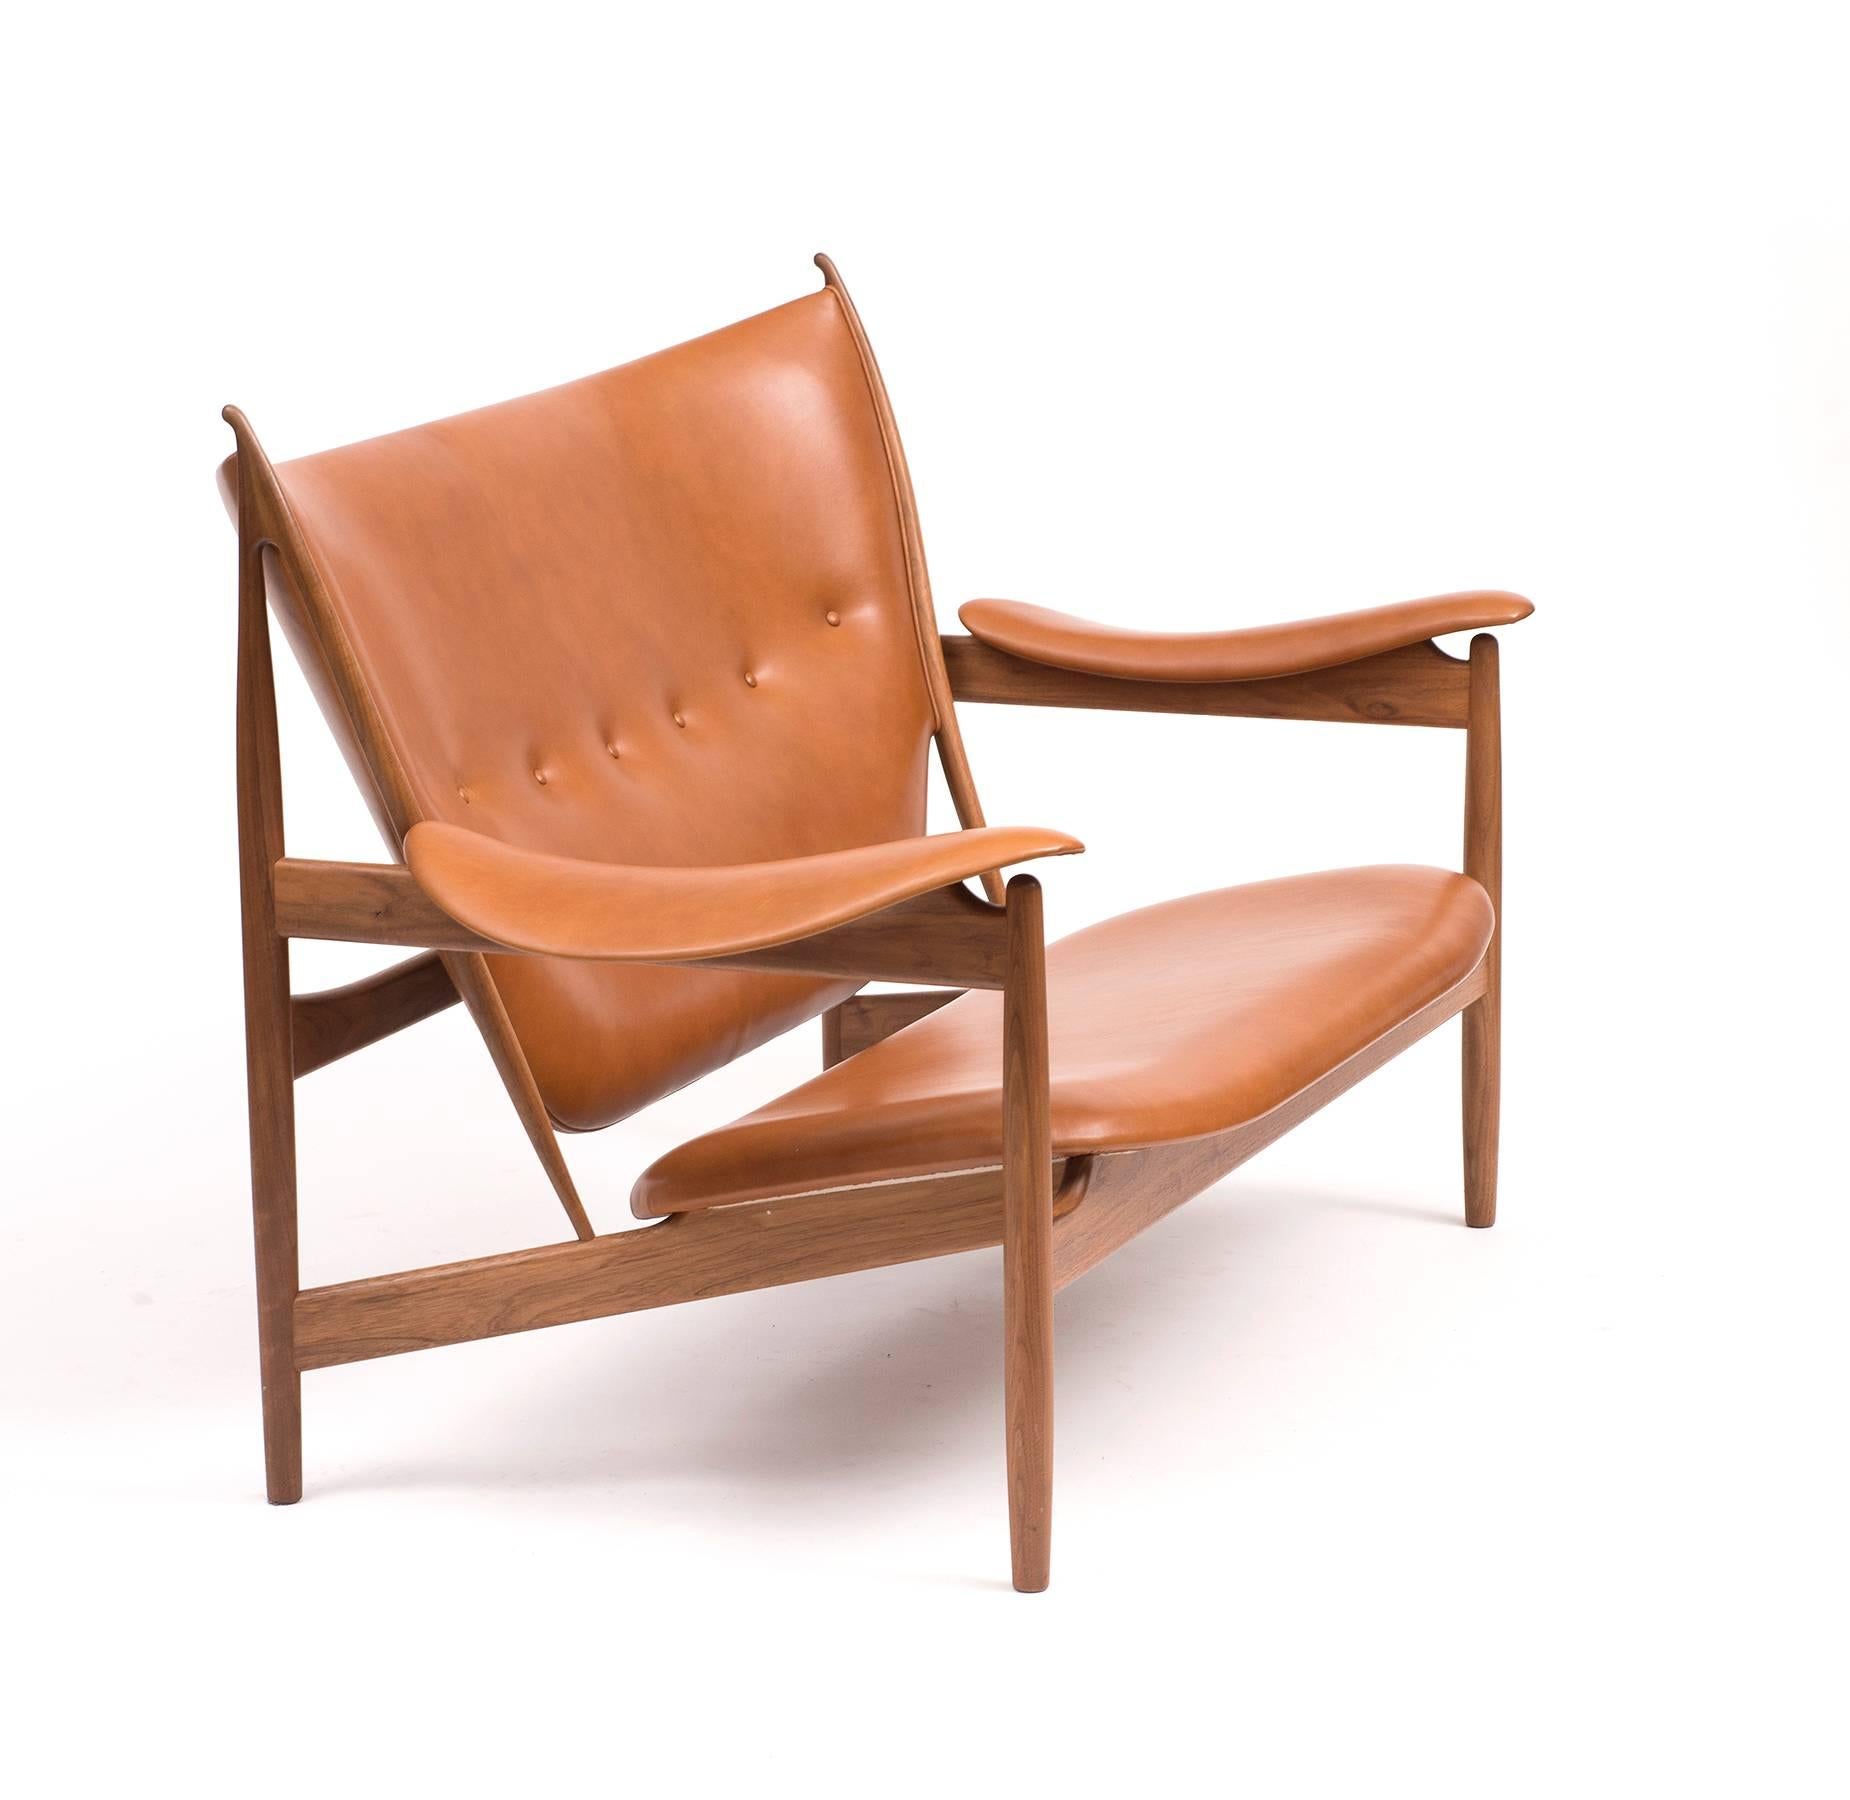 Chieftain sofa by Finn Juhl. Two-seat sofa with frame of walnut. Seat, back and armrests upholstered with brown leather. Designed in 1949 by Finn Juhl and originally only produced in one single issue by Niels Vodder. Reintroduced in 2013 by